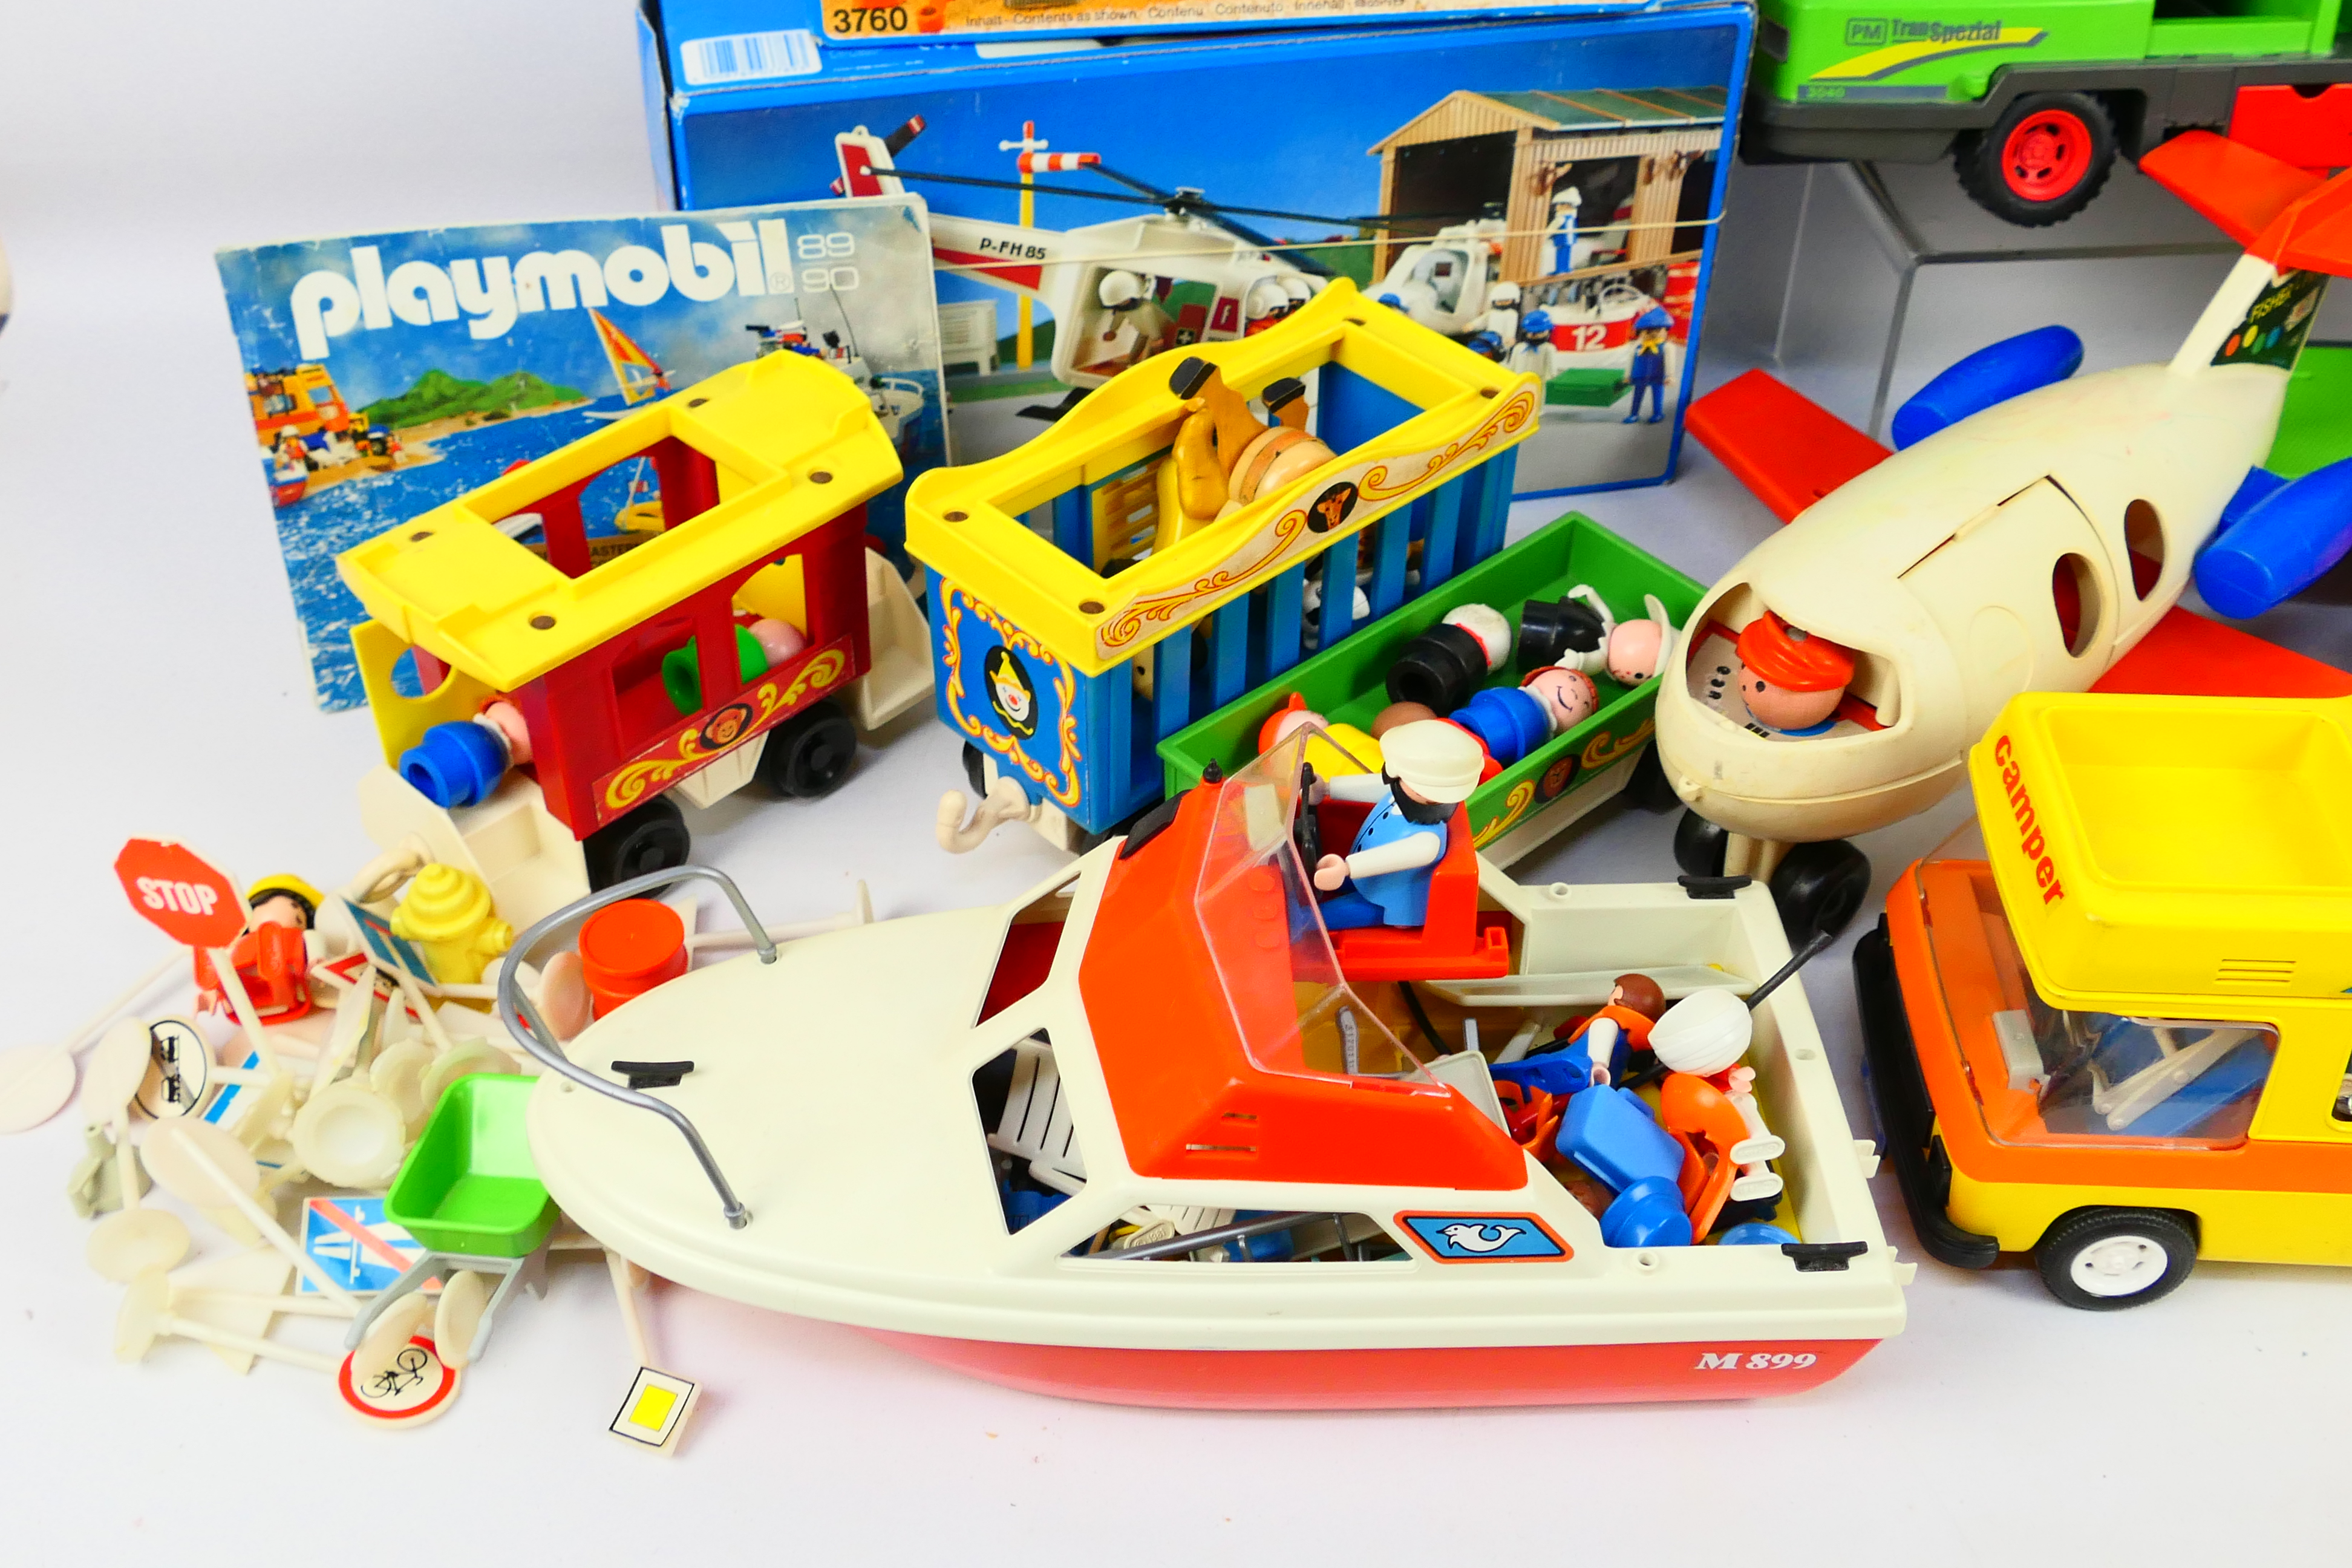 Fisher Price - Playmobil - A collection of vintage Fisher Price toys and 2 x boxed Playmobil sets, - Image 4 of 5